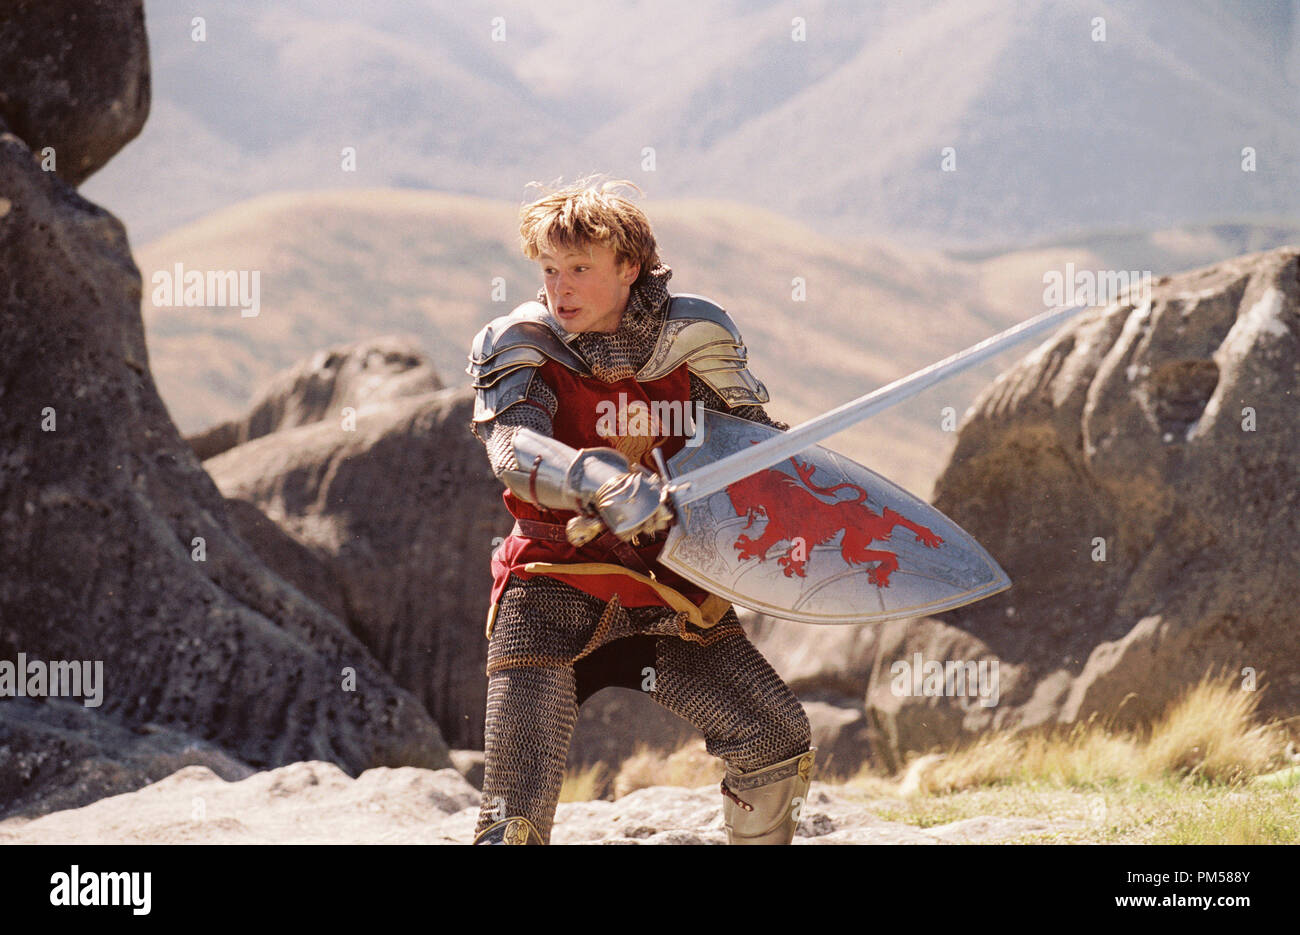 Studio Publicity Still from 'The Chronicles of Narnia: The Lion, the Witch and the Wardrobe'  William Moseley © 2005 Walt Disney Pictures  Photo by Phil Bray    File Reference # 307361571THA  For Editorial Use Only -  All Rights Reserved Stock Photo